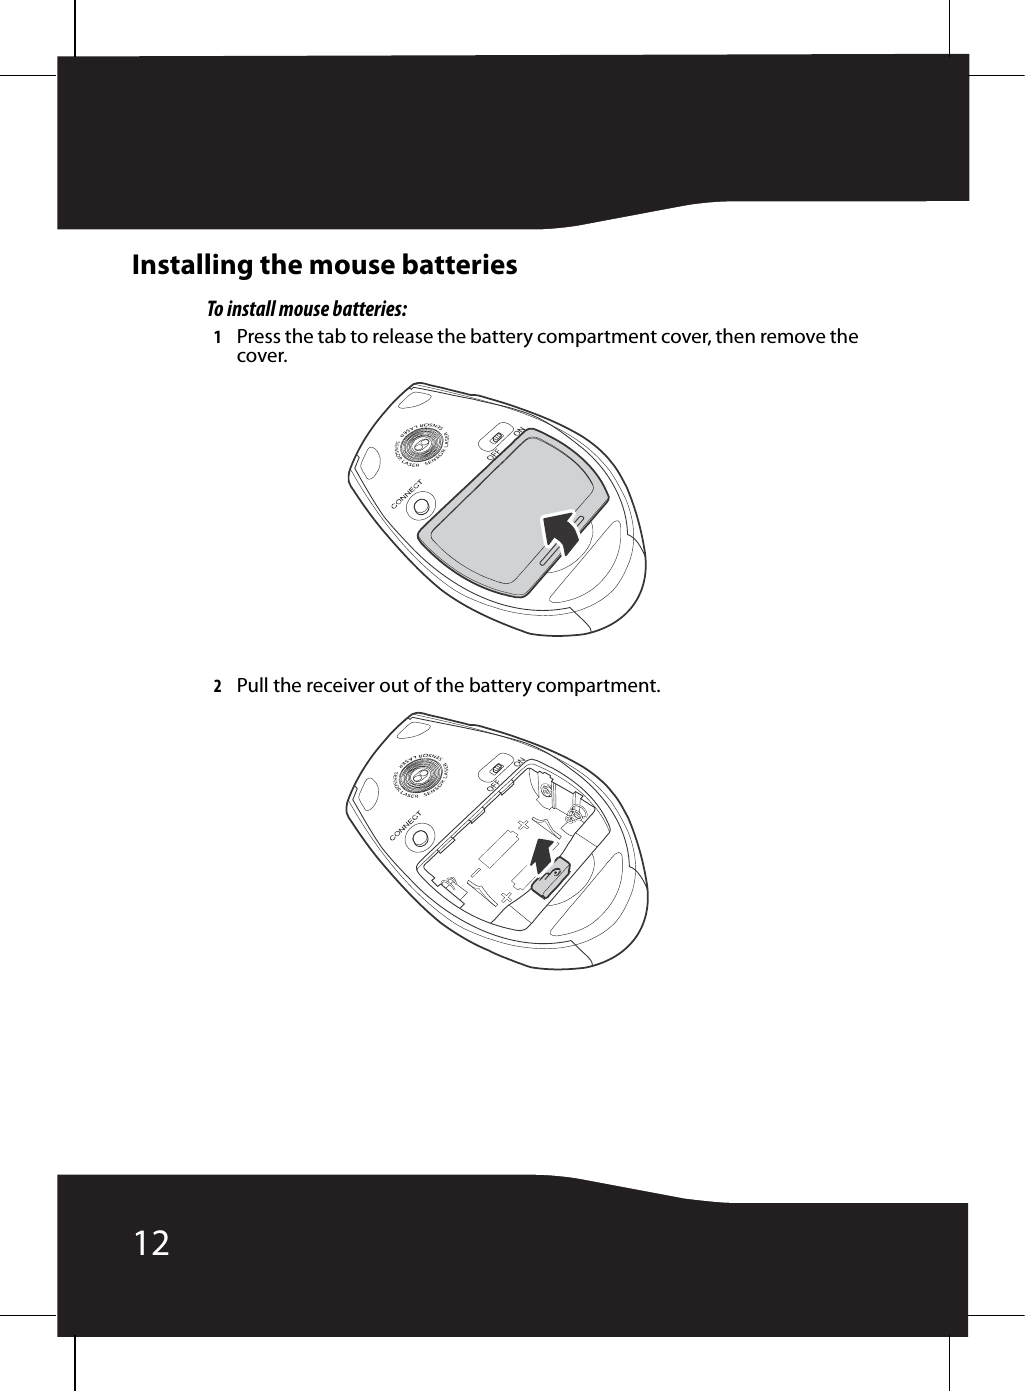 12Installing the mouse batteriesTo install mouse batteries:1Press the tab to release the battery compartment cover, then remove the cover.2Pull the receiver out of the battery compartment.